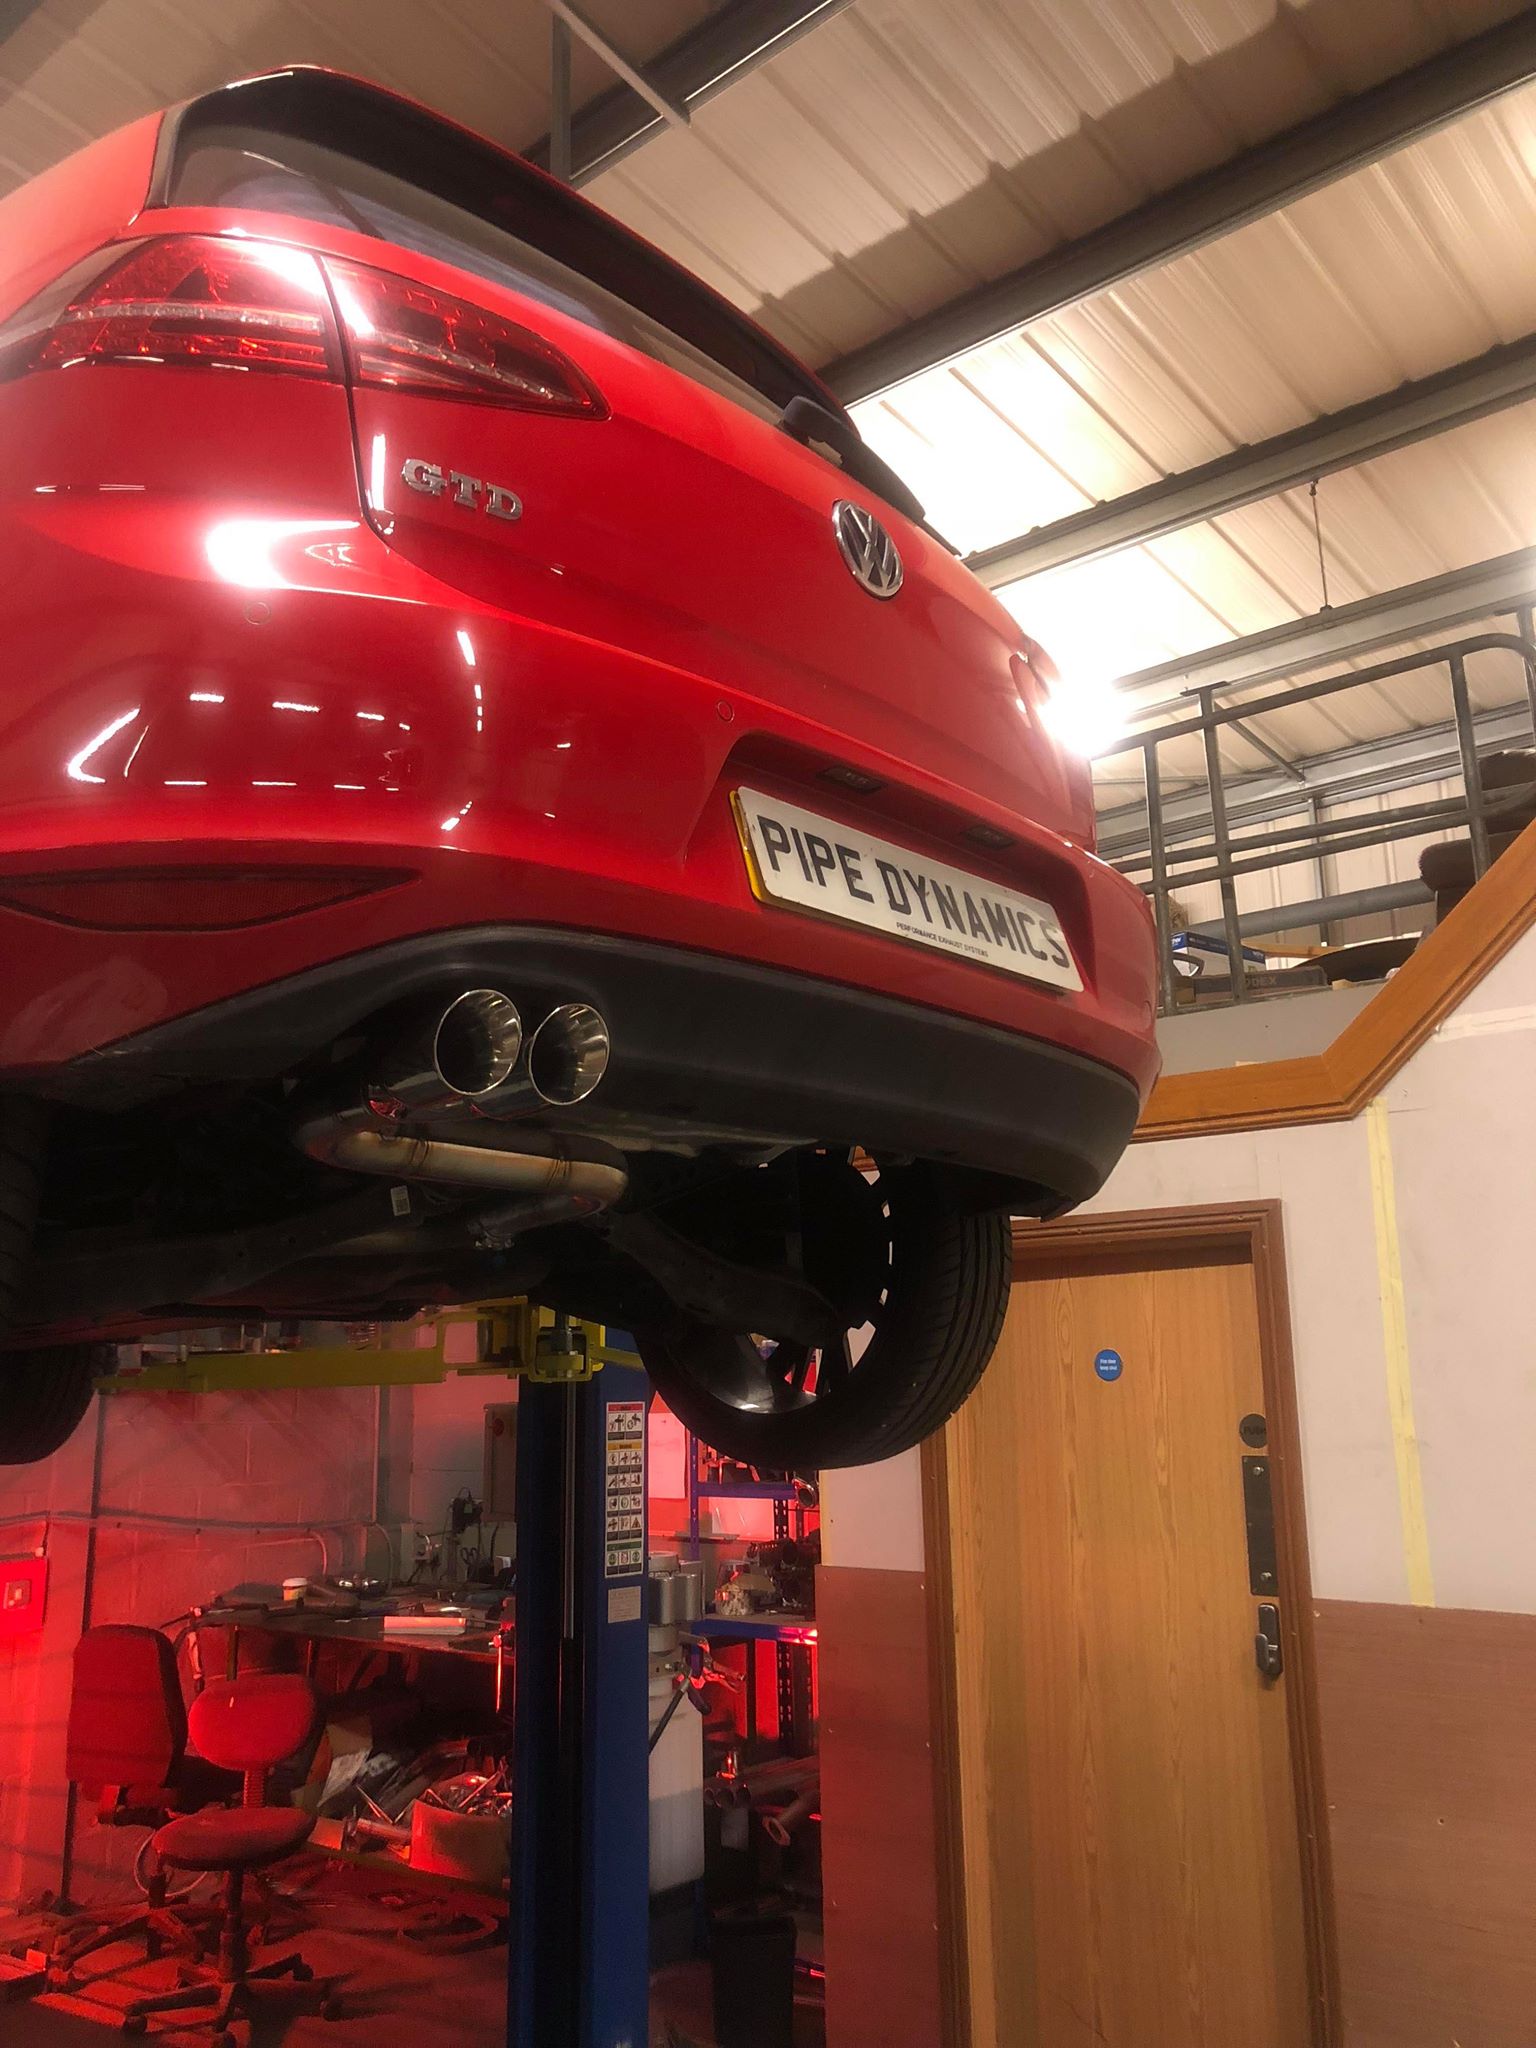 VW Golf MK7 2.0 GTD (without sound pack) Back Box Delete Pipe Dynamics Performance Exhaust